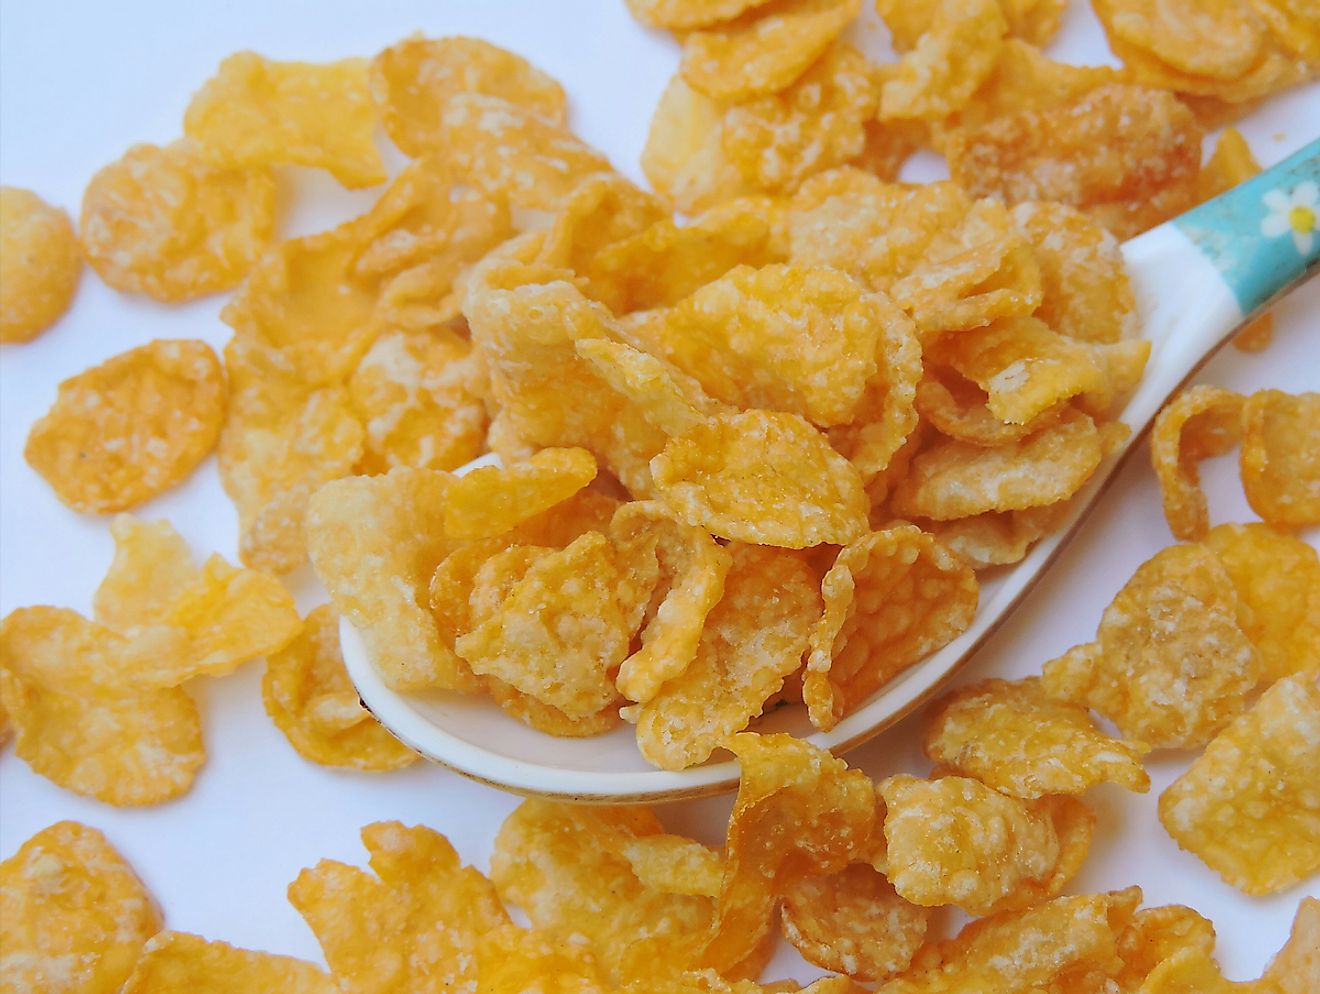 Corn flakes, or cornflakes, are a breakfast cereal made by toasting flakes of corn (maize). Image credit: Gyan Pratim Raichoudhury Shutterstock.com